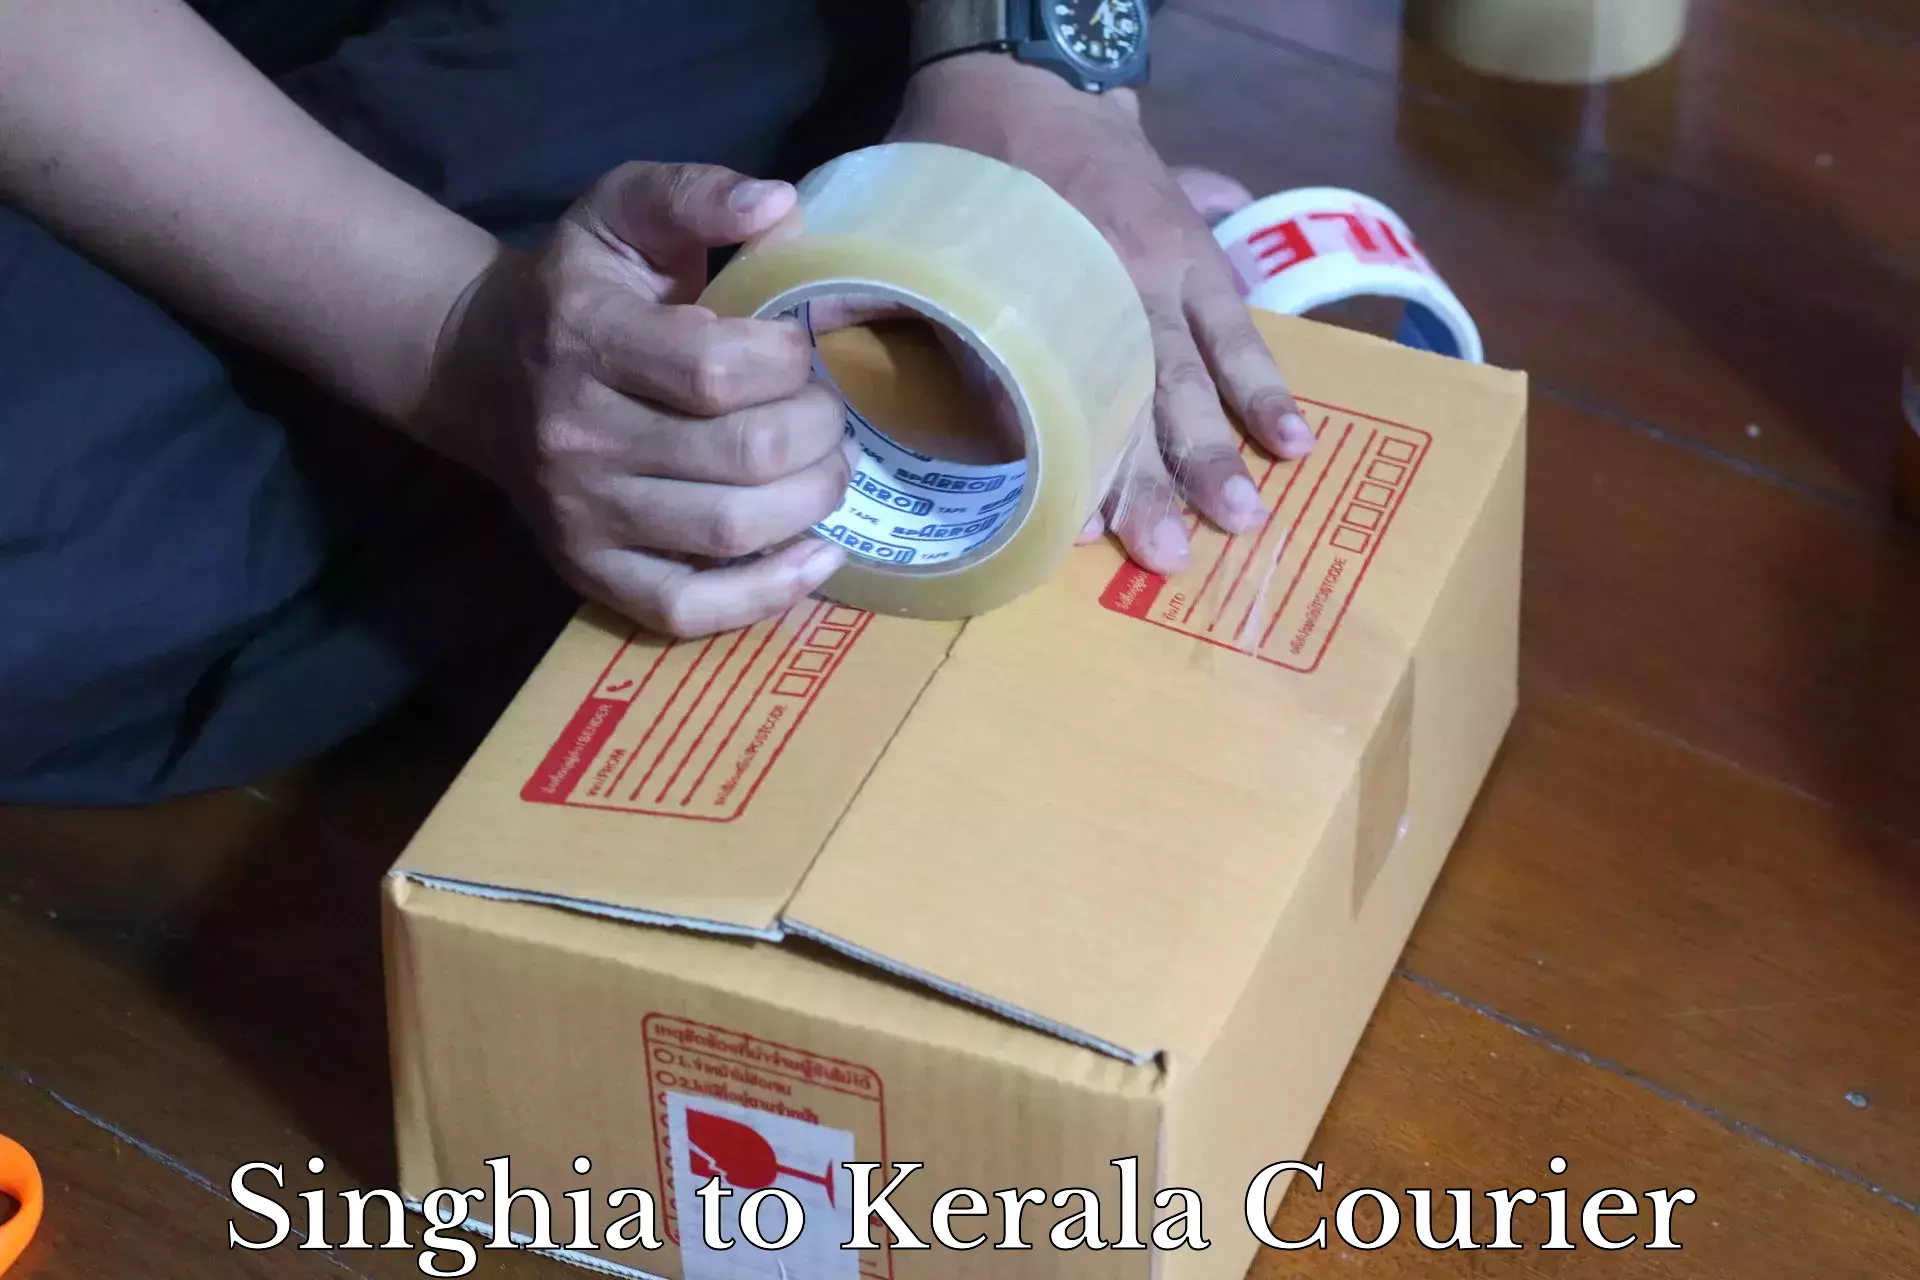 User-friendly delivery service Singhia to Kerala